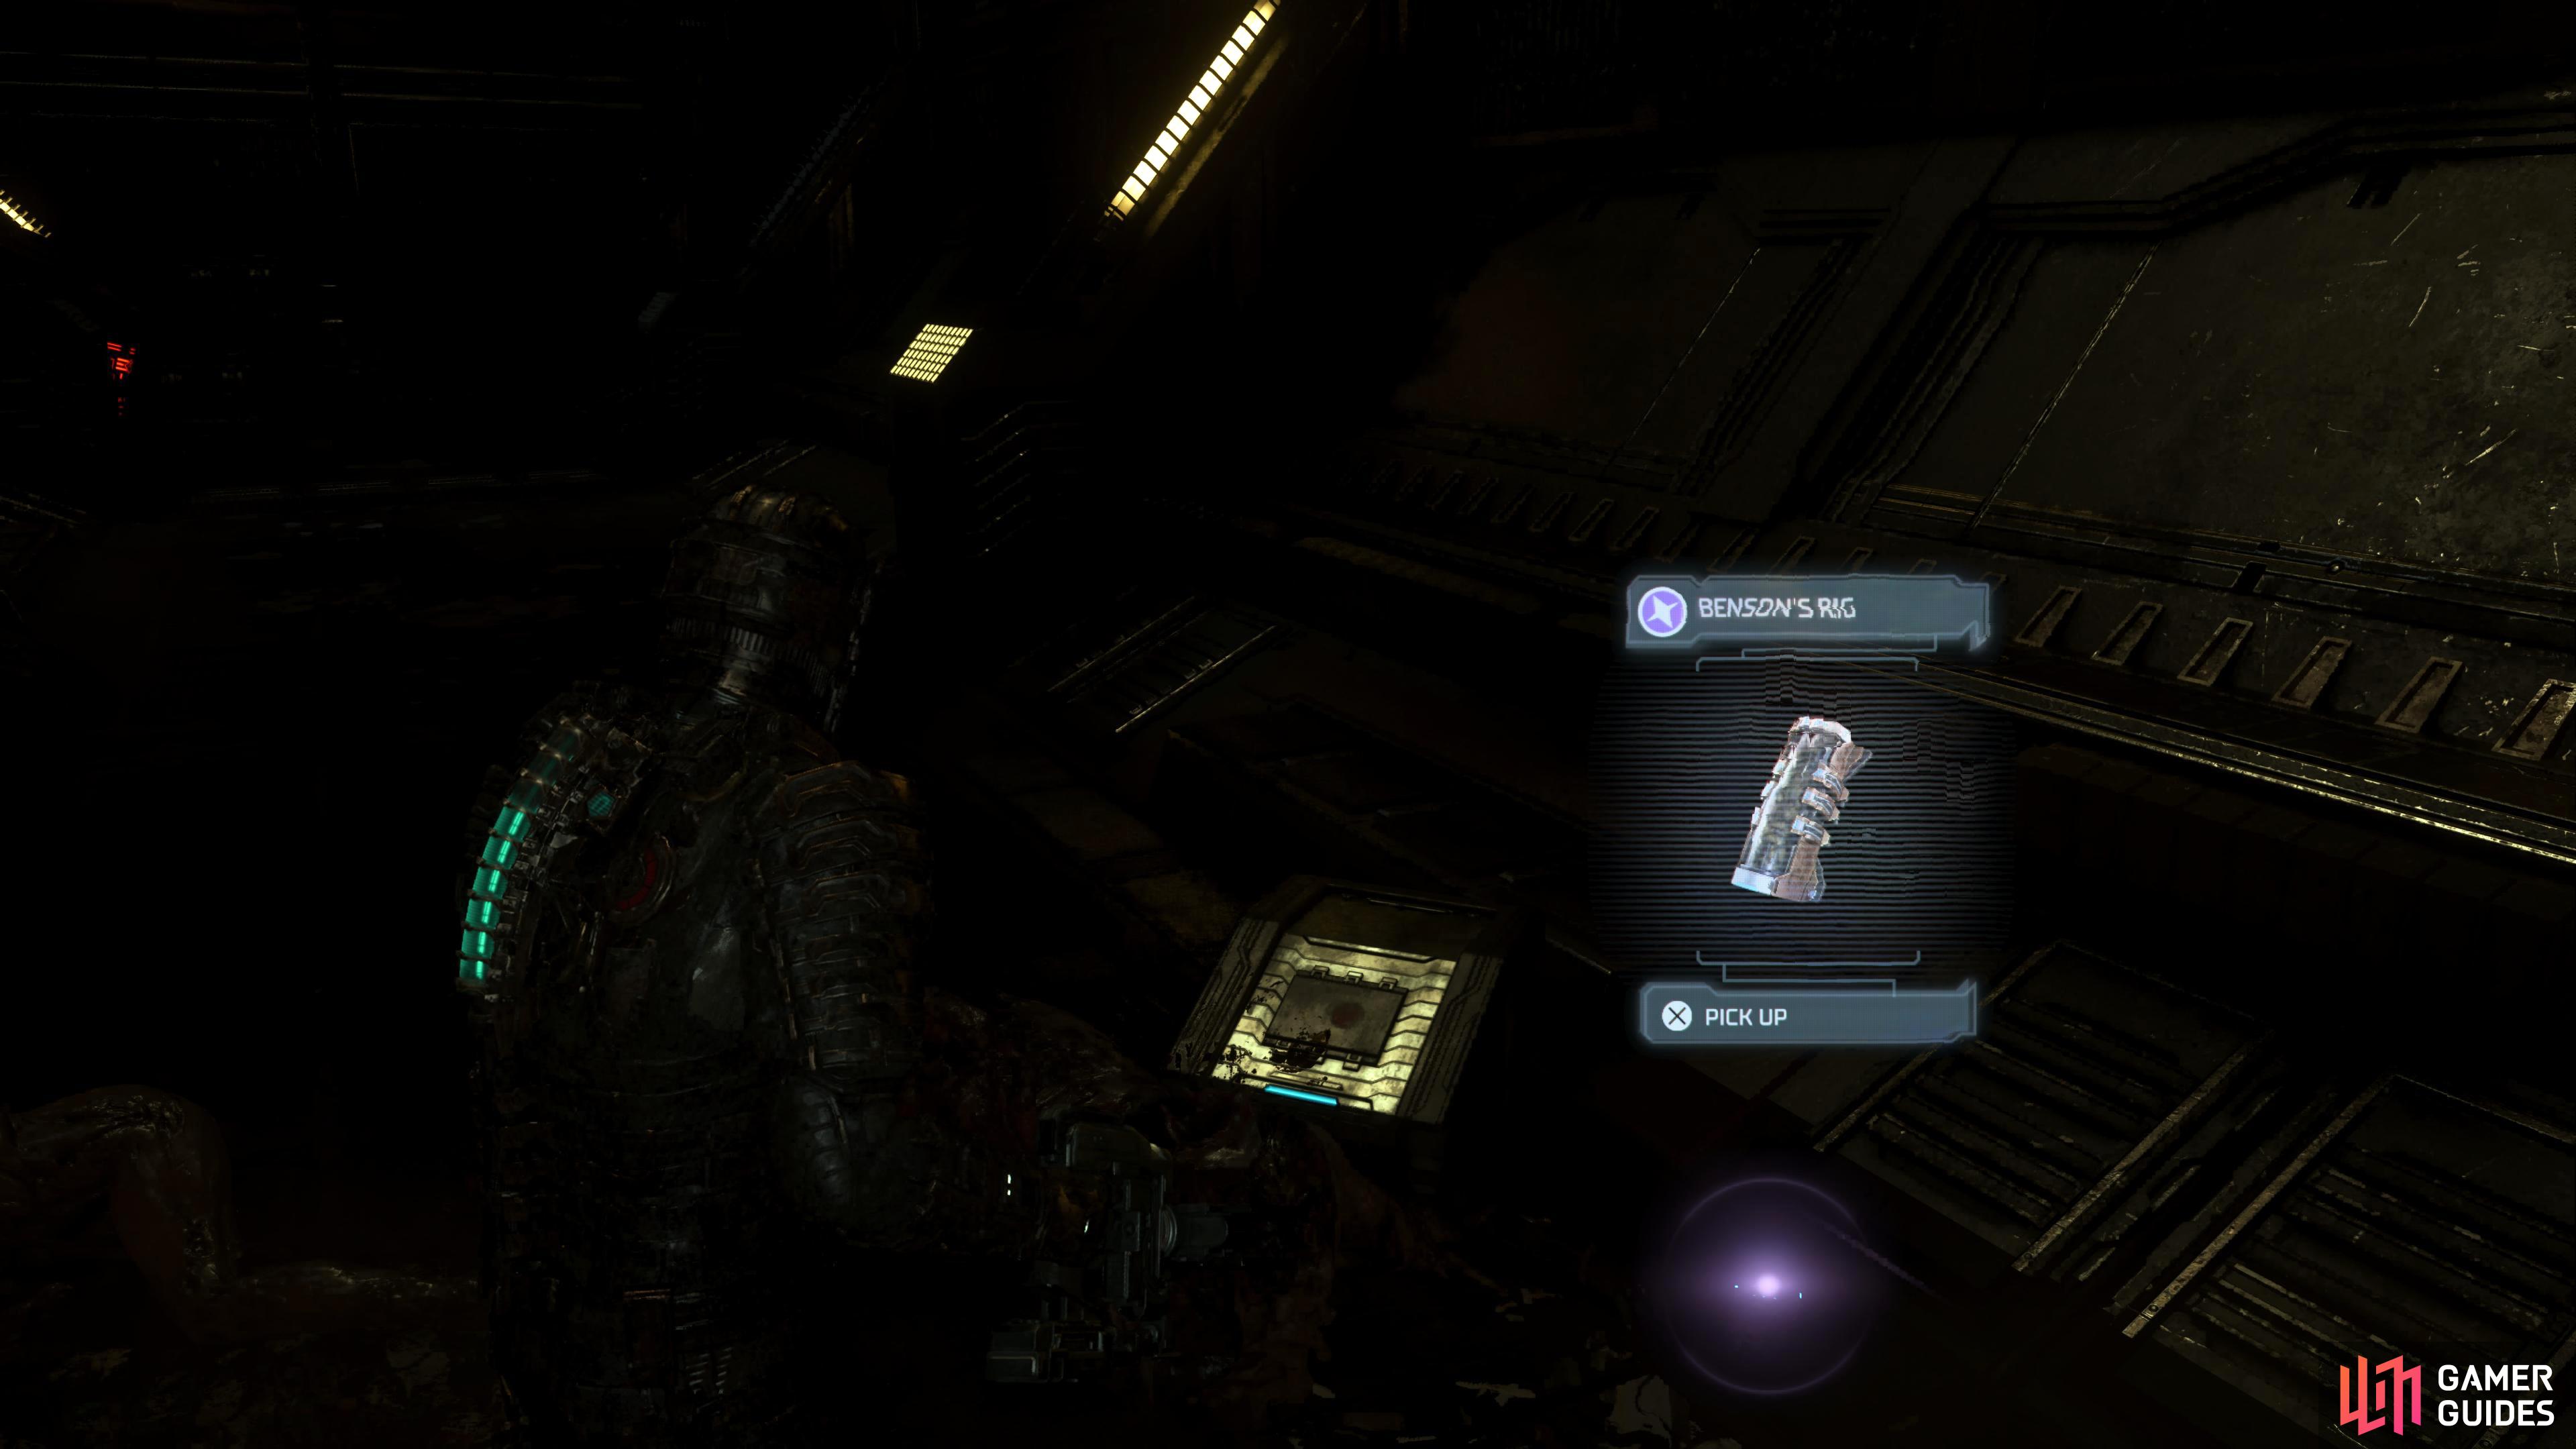 DEAD SPACE NO BOOSTEROID! FREE TRIAL! JPG Stream #Boosteroid partner 